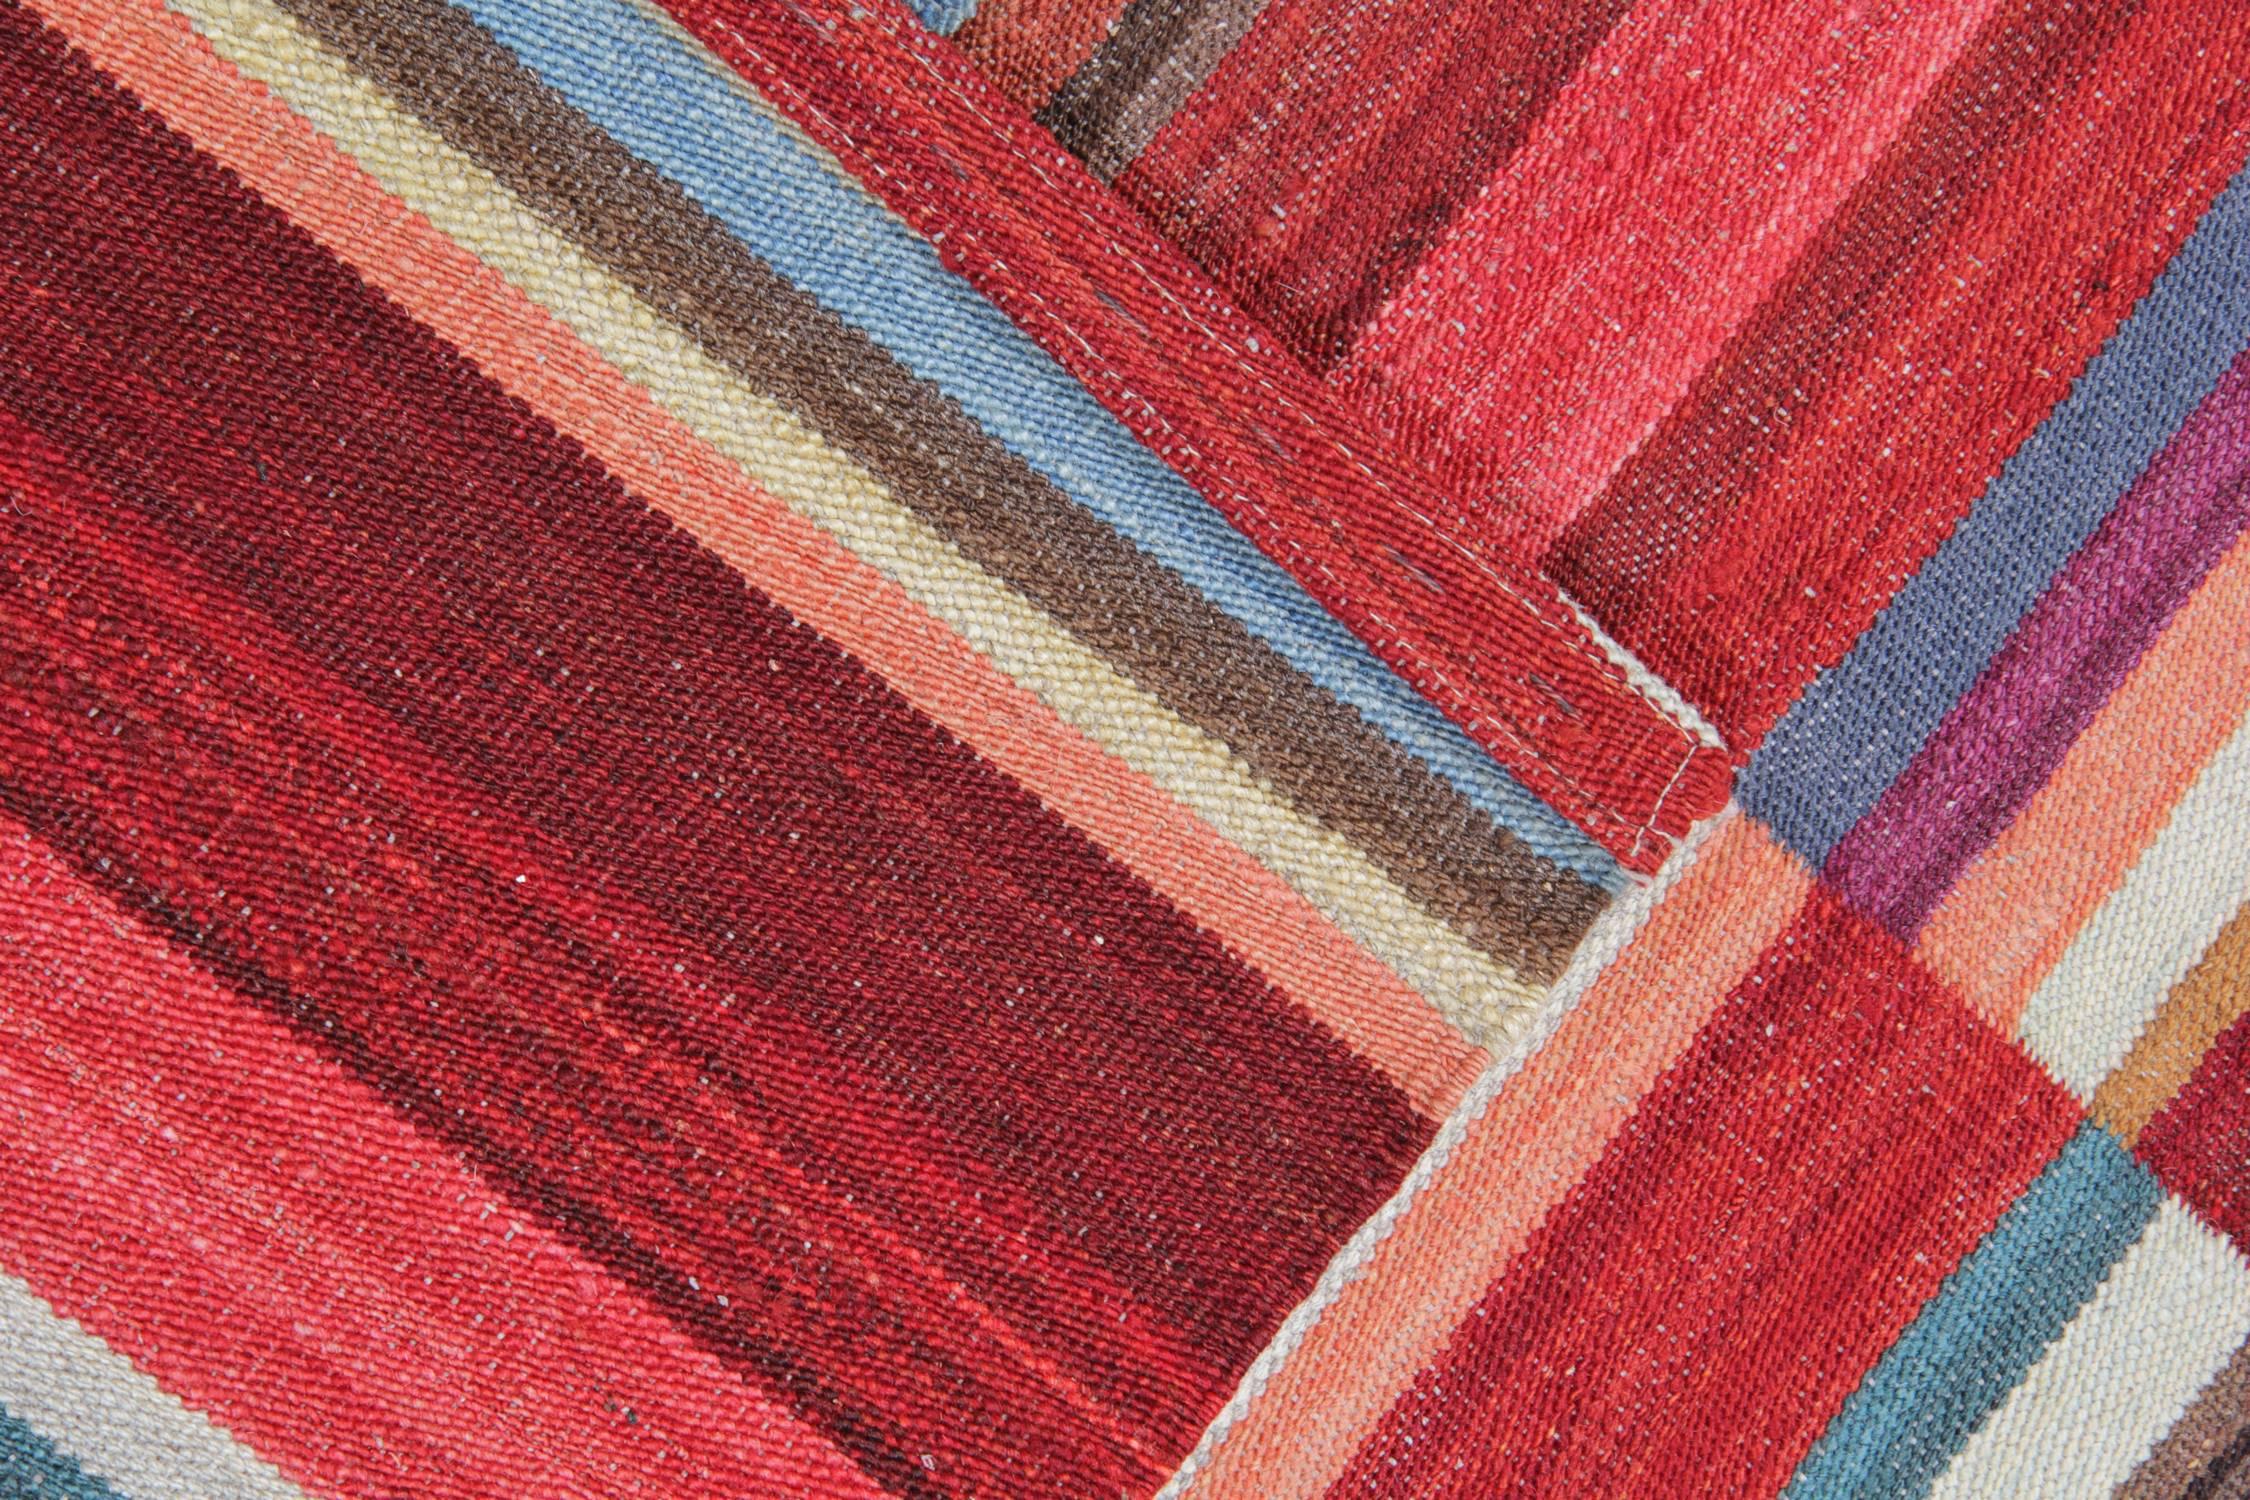 Contemporary Afghan rugs, Multi coloured Kilim Rugs from Afghanistan